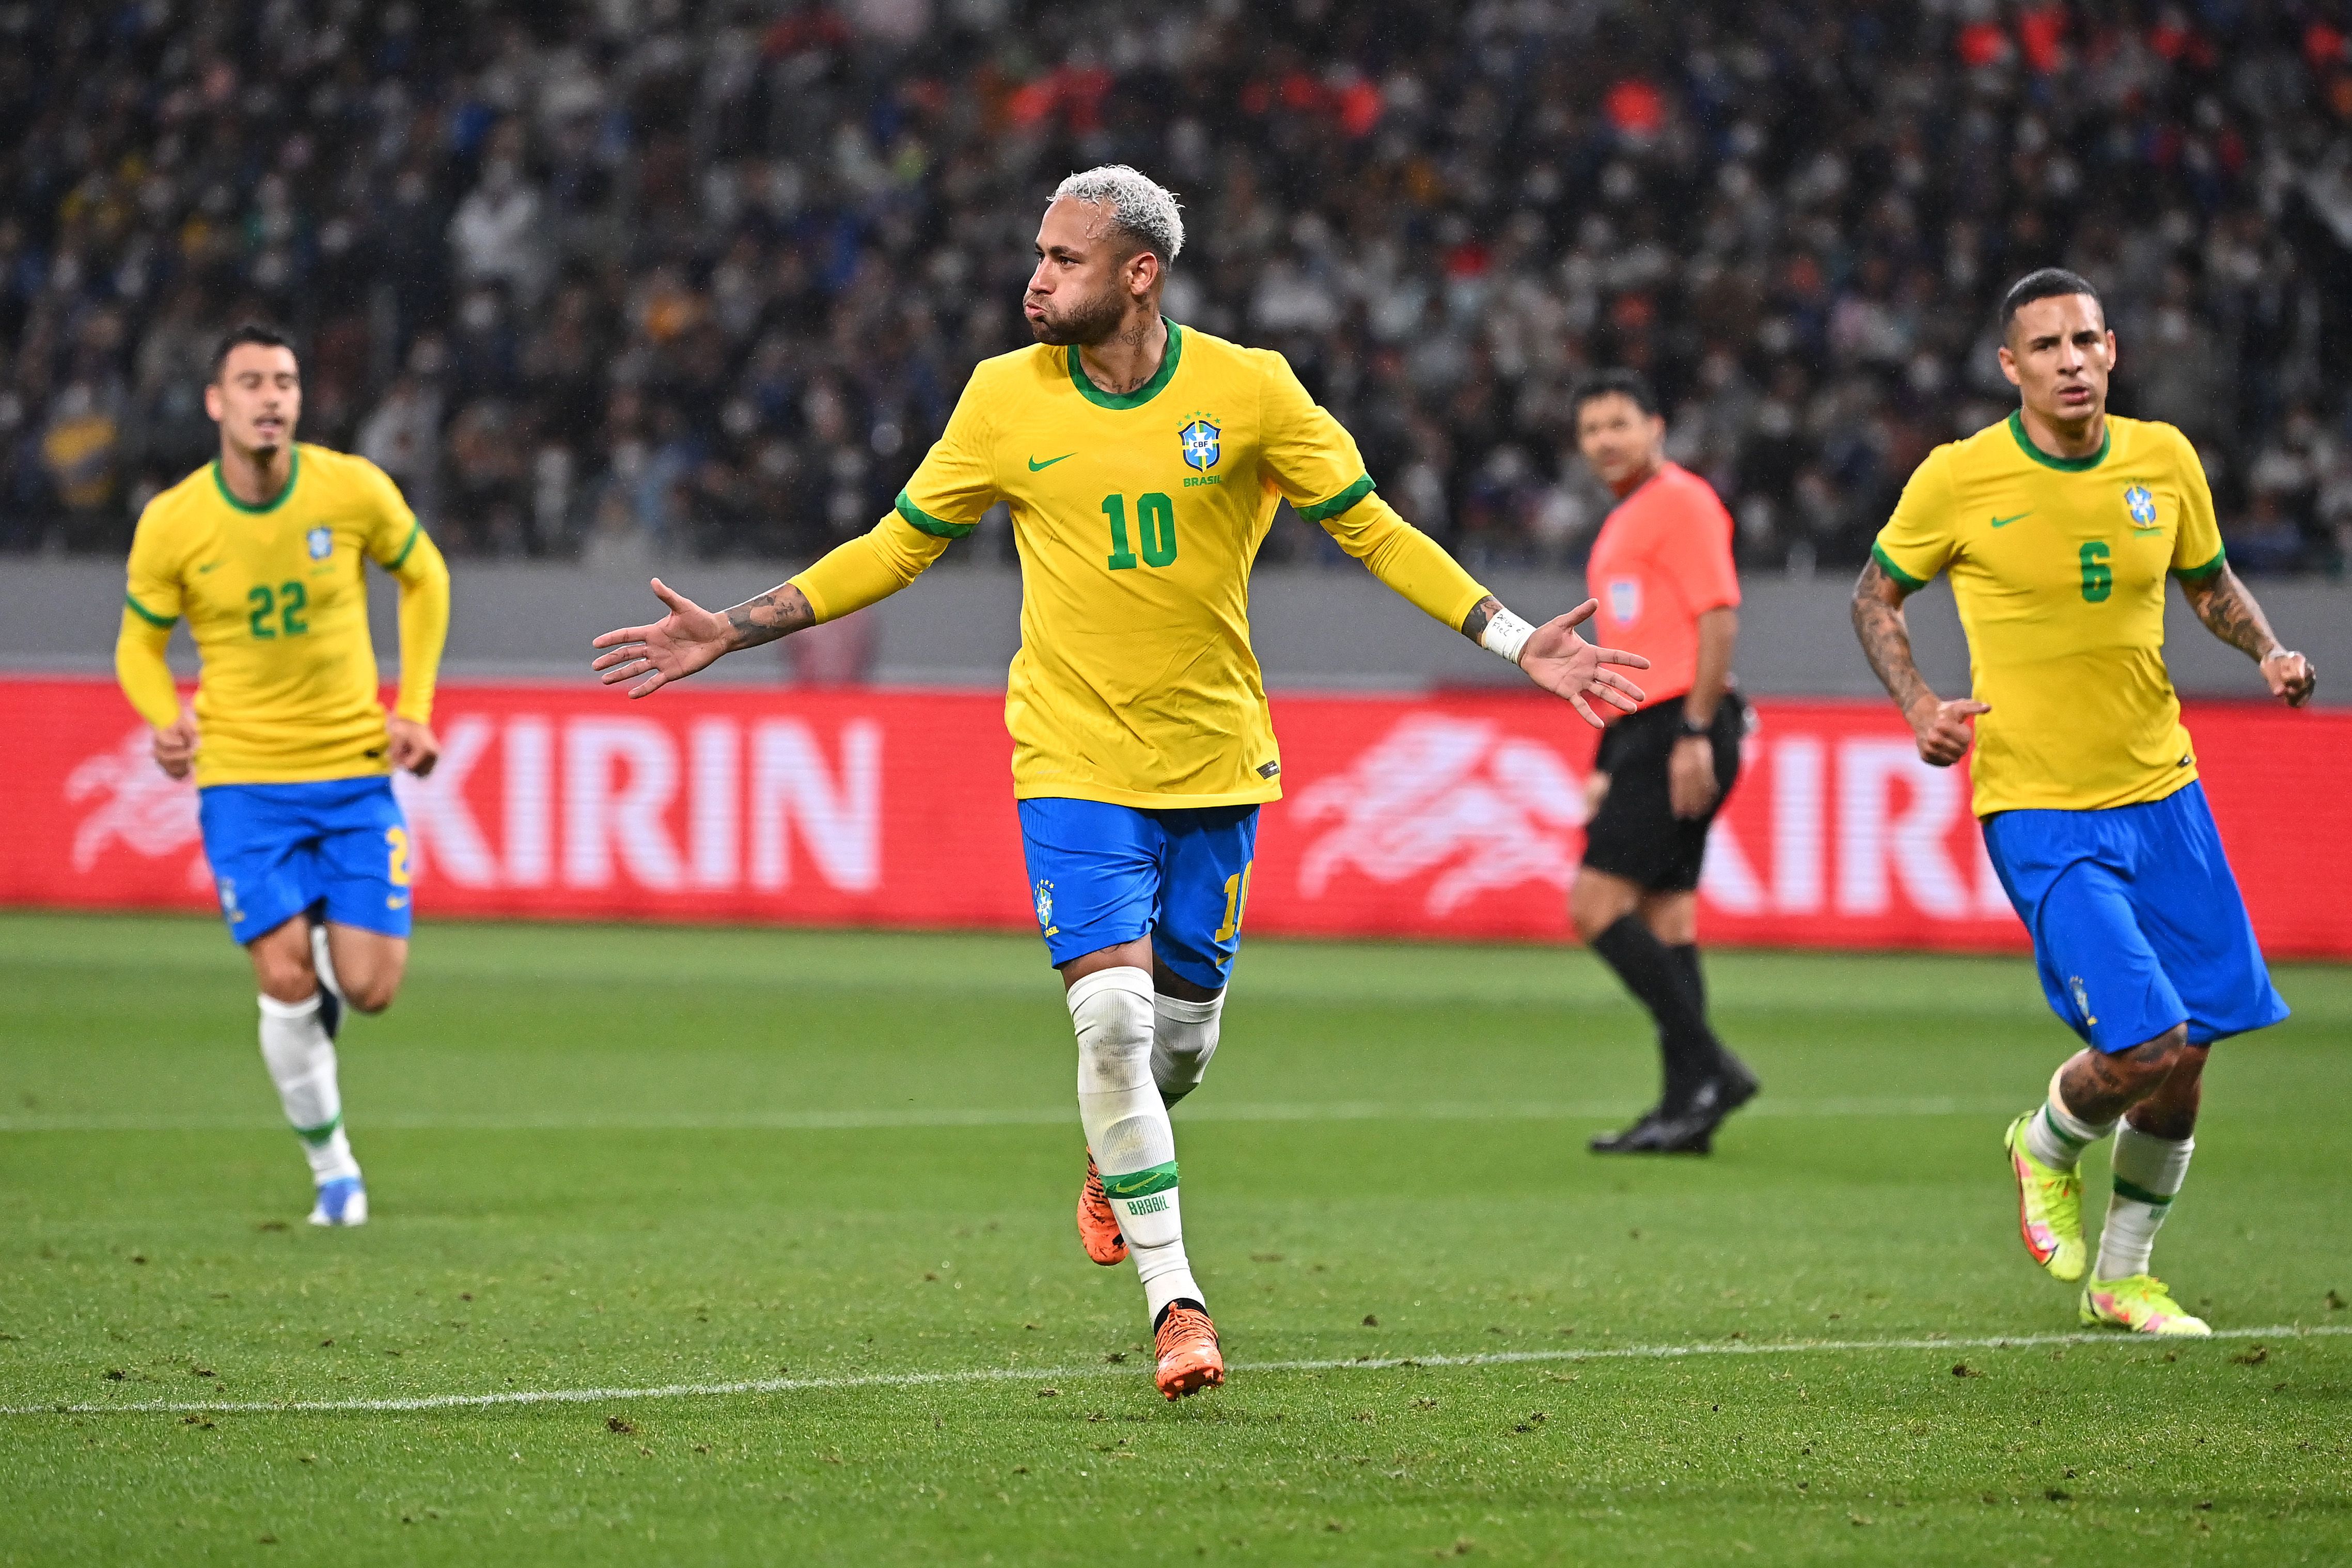 Neymar Jr. of Brazil celebrates scoring his side's first goal during the international friendly match between Japan and Brazil at National Stadium on June 6, 2022 in Tokyo, Japan